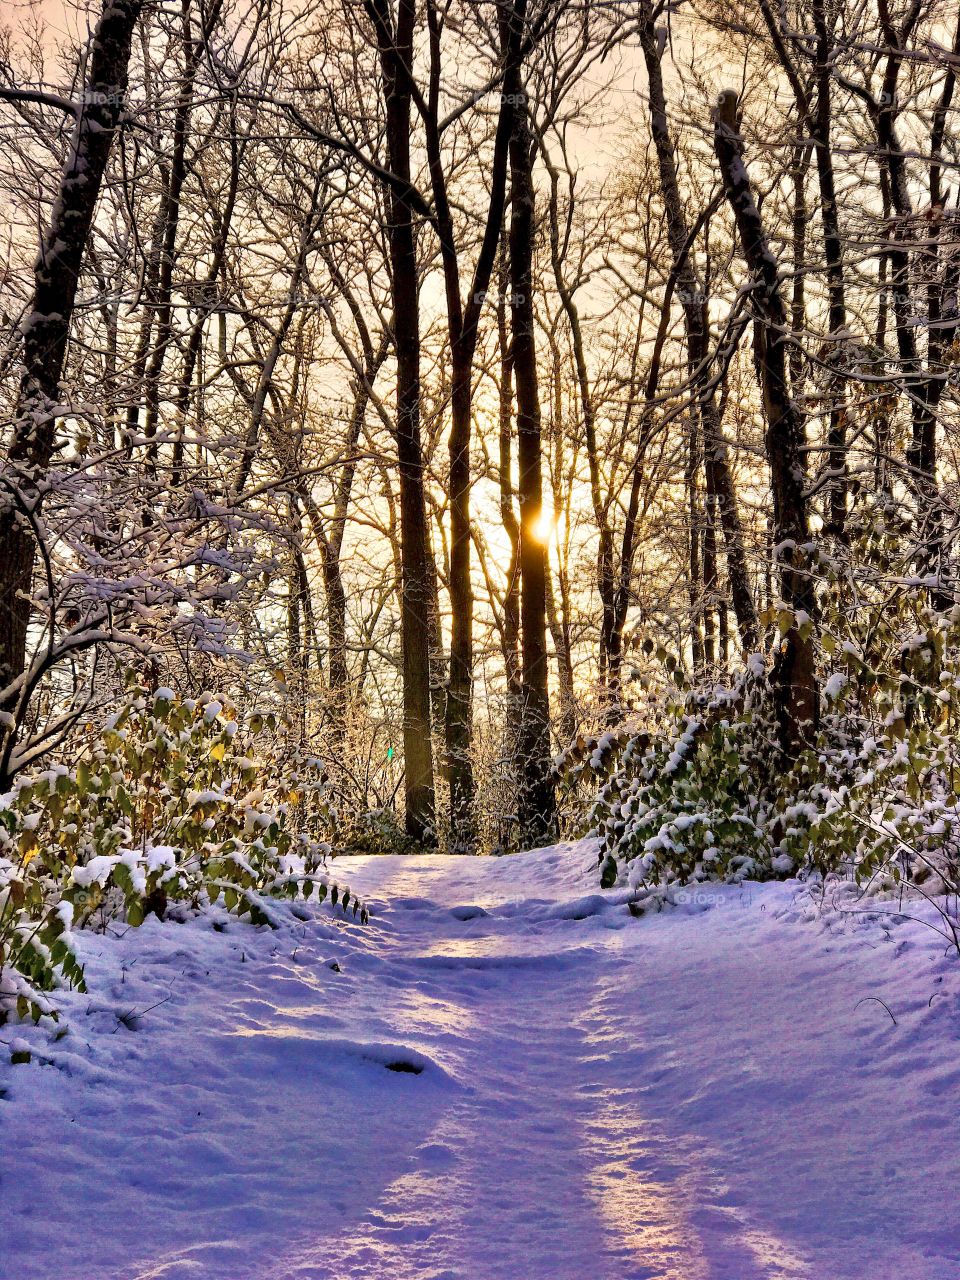 Sunset view of winter in forest